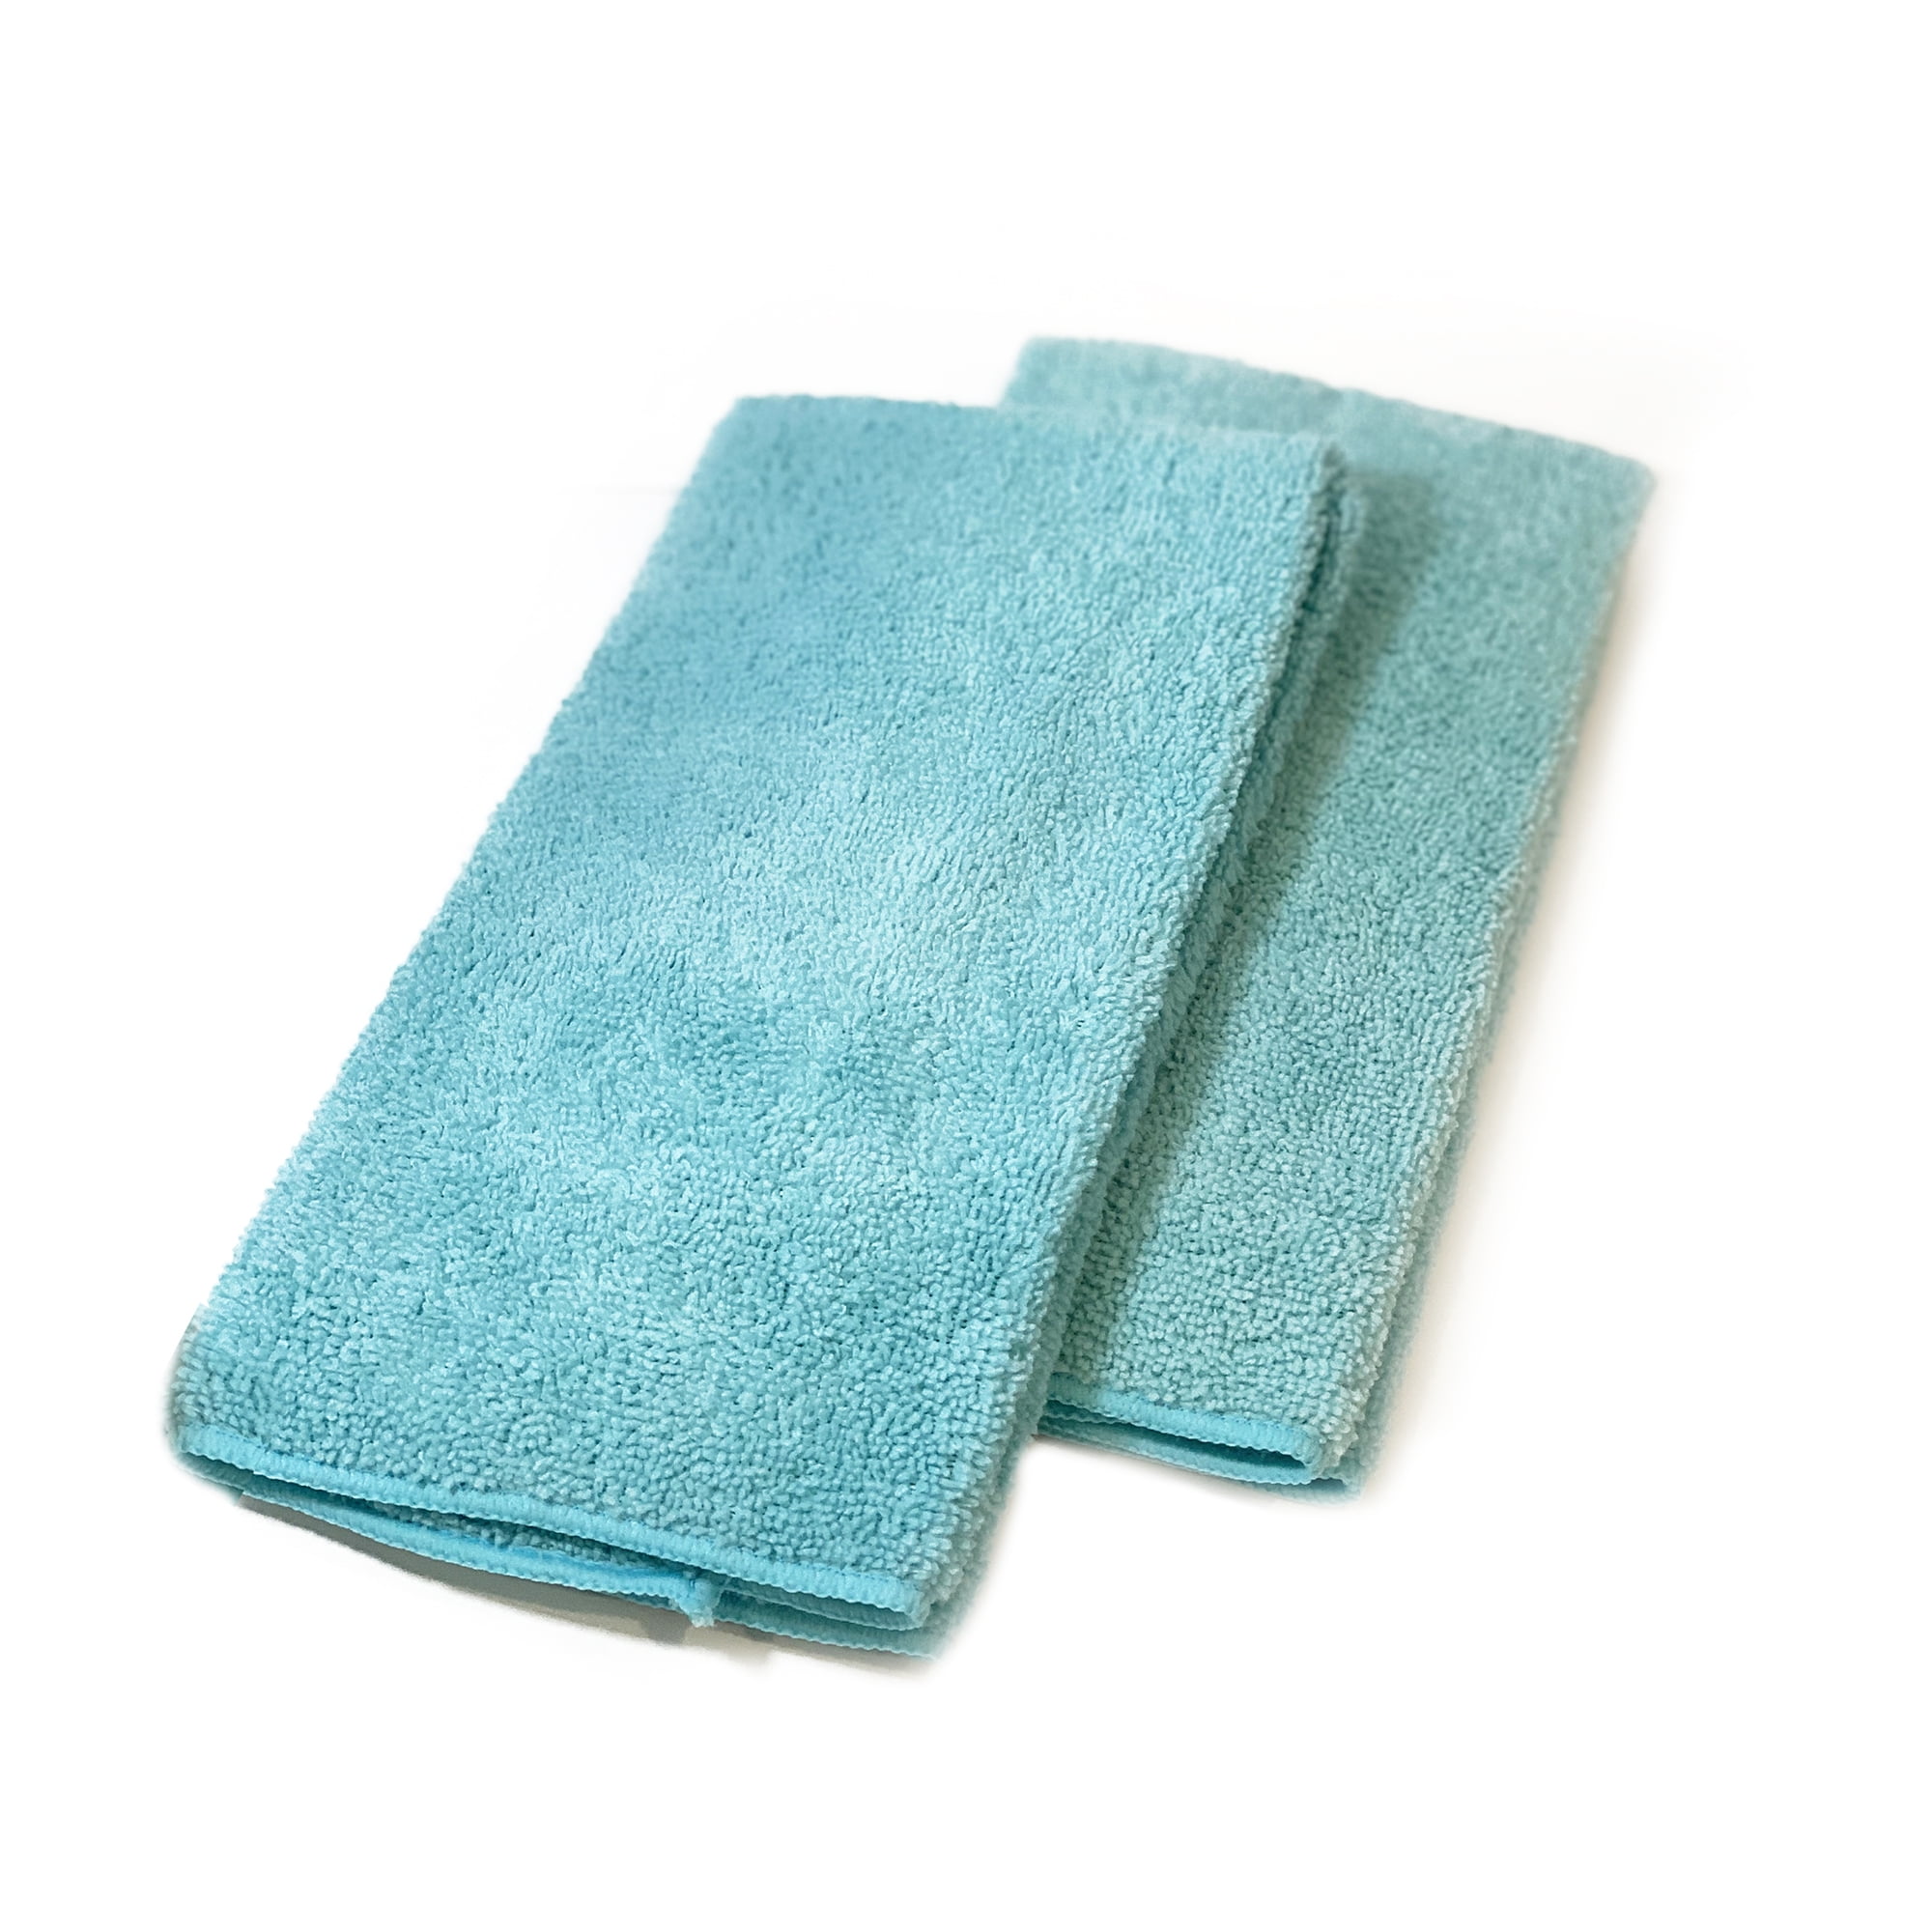 Skycase Microfiber Towels for Cars,[5 Pack]Professional Premium All-Purpose  Microfiber Towels for Household Cleaning Car Washing,Highly  Absorbent,LINT-Free,Cleaning Towels (15.7x15.7),Blue 